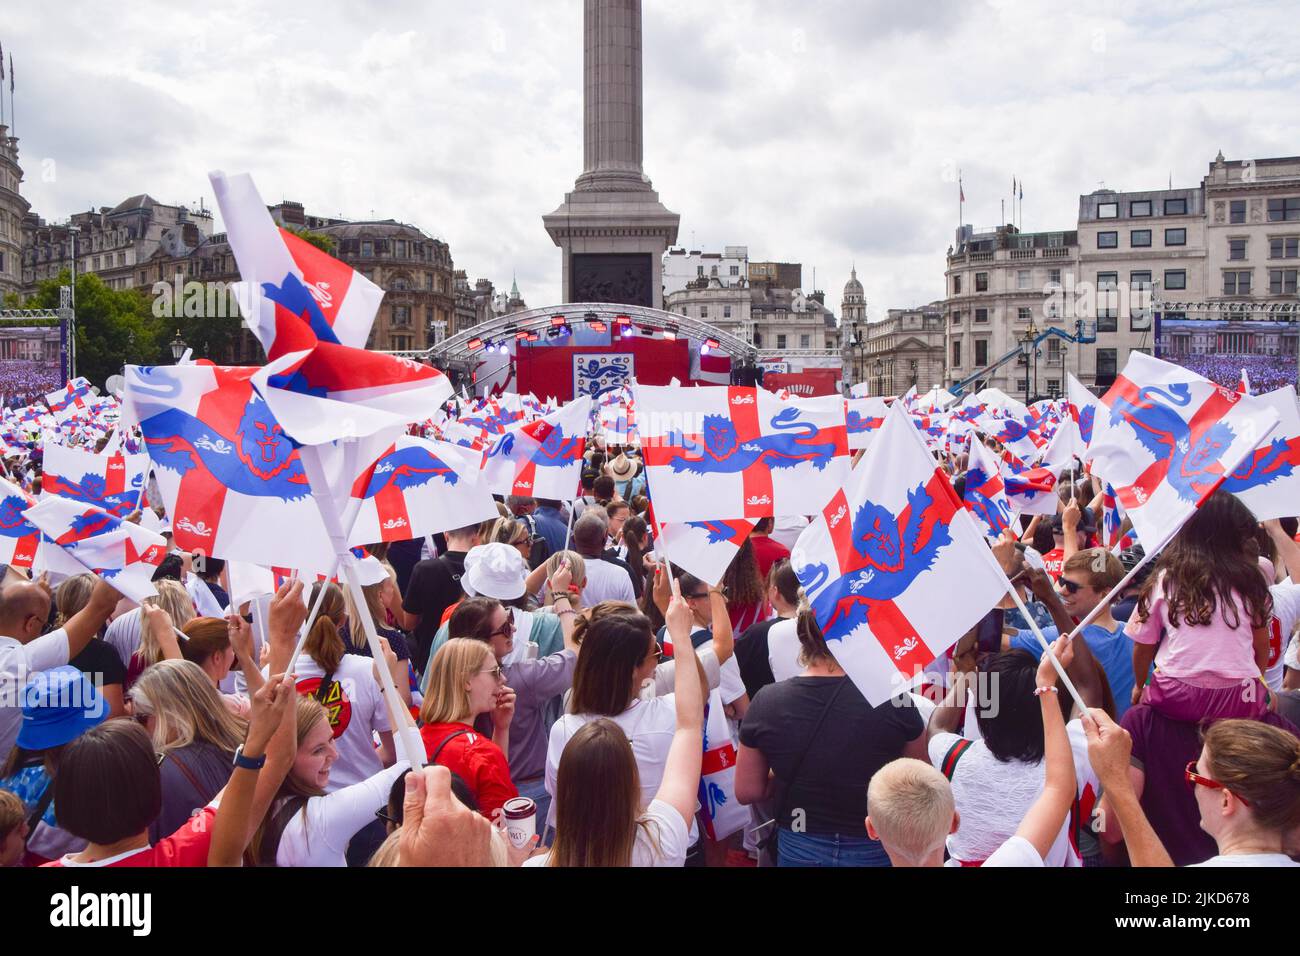 London, UK. 01st Aug, 2022. Supporters wave England flags during the Women's Euro 2022 special event in Trafalgar Square. Thousands of people gathered to celebrate the England team, known as the Lionesses, winning Women's Euro 2022 soccer tournament. England beat Germany 2-1. Credit: SOPA Images Limited/Alamy Live News Stock Photo